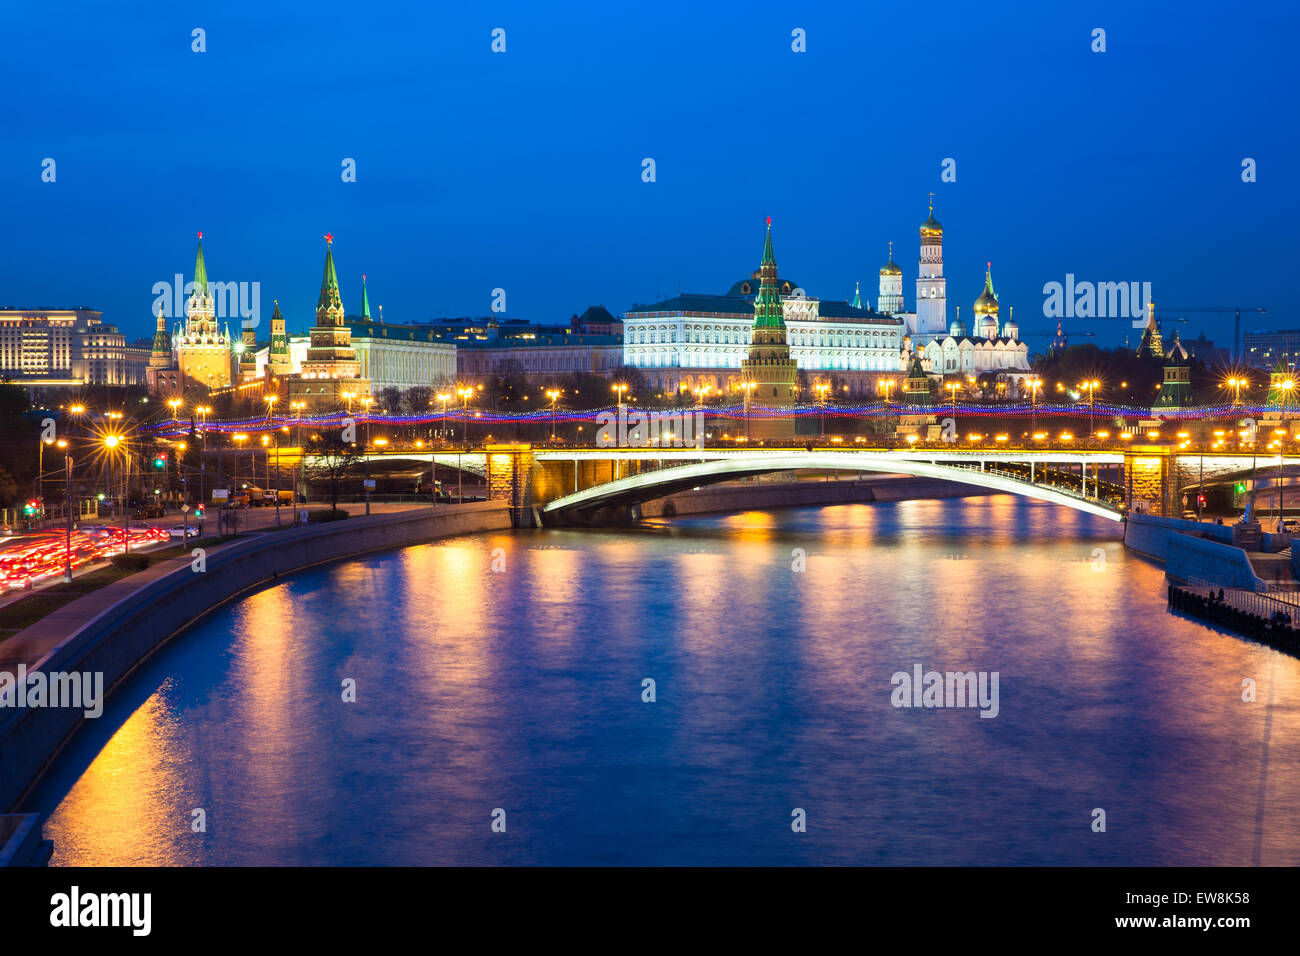 Dusk view of the Moscow Kremlin from Moskva river, Moscow, Russia. Stock Photo